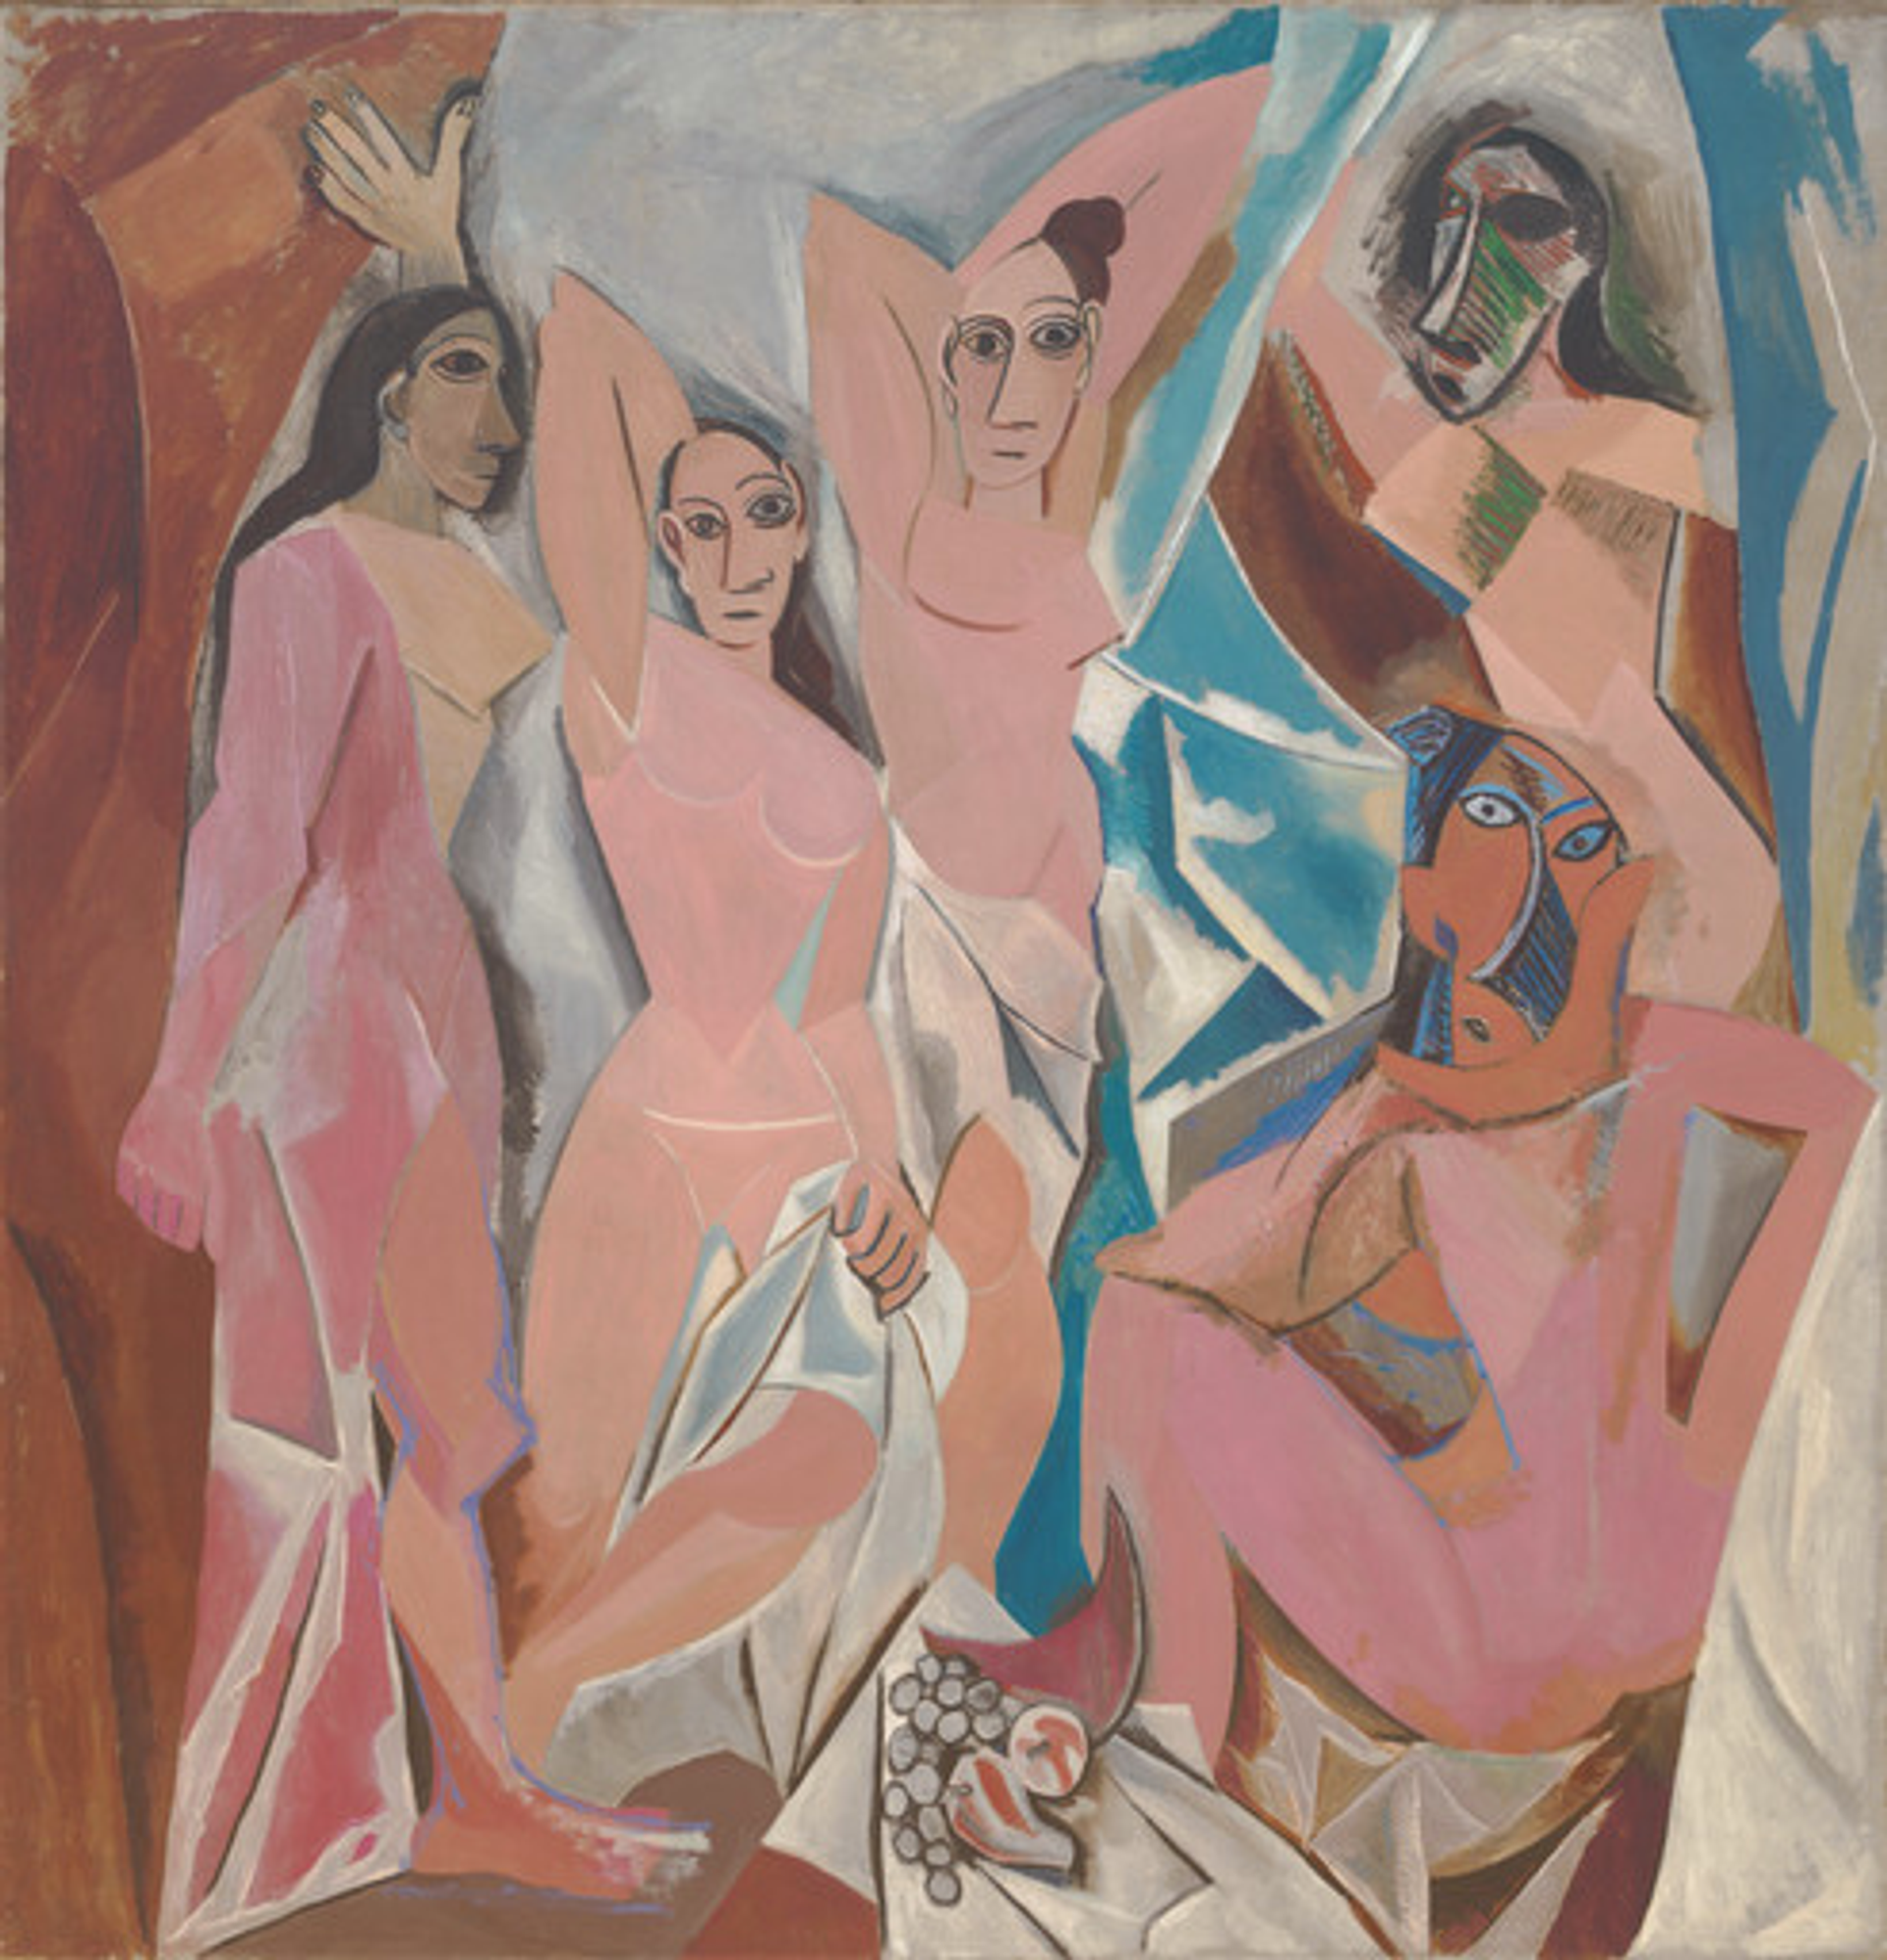 Pablo Picasso’s Les Demoiselles d'Avignon. A Cubist composition of five women painted in hues of pink facing the viewer with backgrounds of muted red and blue.